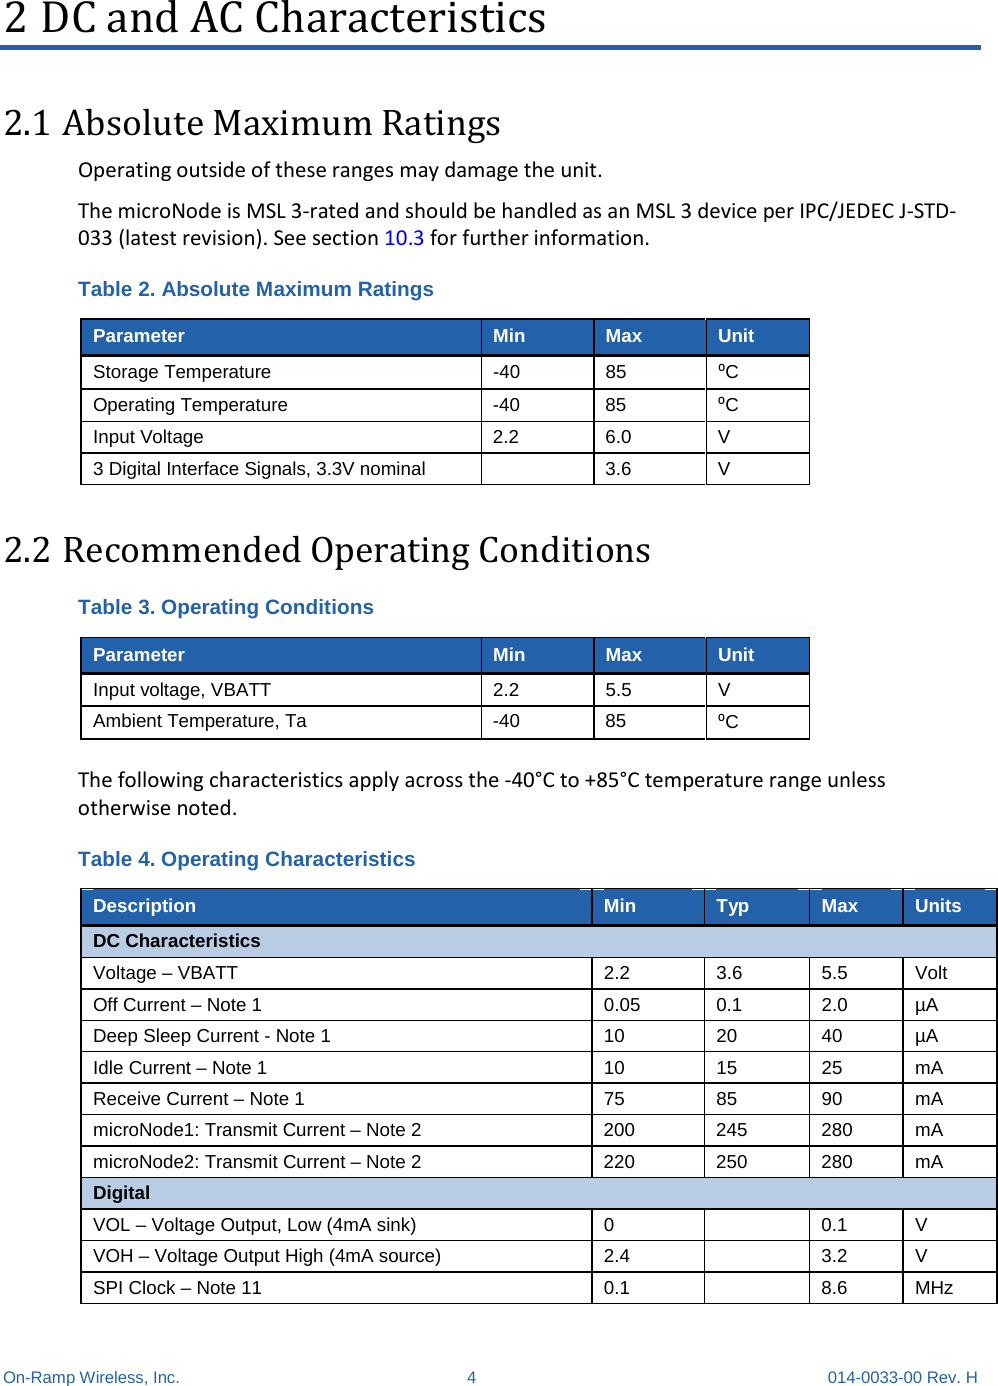  On-Ramp Wireless, Inc.  4  014-0033-00 Rev. H 2 DC and AC Characteristics 2.1 Absolute Maximum Ratings Operating outside of these ranges may damage the unit. The microNode is MSL 3-rated and should be handled as an MSL 3 device per IPC/JEDEC J-STD-033 (latest revision). See section 10.3 for further information. Table 2. Absolute Maximum Ratings Parameter Min Max Unit Storage Temperature  -40 85 ⁰C Operating Temperature  -40 85 ⁰C Input Voltage 2.2 6.0  V 3 Digital Interface Signals, 3.3V nominal    3.6  V 2.2 Recommended Operating Conditions Table 3. Operating Conditions Parameter Min Max Unit Input voltage, VBATT 2.2 5.5  V Ambient Temperature, Ta  -40 85 ⁰C  The following characteristics apply across the -40°C to +85°C temperature range unless otherwise noted. Table 4. Operating Characteristics Description Min Typ Max Units DC Characteristics Voltage – VBATT  2.2 3.6 5.5  Volt Off Current – Note 1 0.05 0.1 2.0  µA Deep Sleep Current - Note 1 10 20 40 µA Idle Current – Note 1 10 15 25 mA Receive Current – Note 1 75 85 90 mA microNode1: Transmit Current – Note 2 200 245 280 mA microNode2: Transmit Current – Note 2 220 250 280 mA Digital VOL – Voltage Output, Low (4mA sink)  0    0.1  V VOH – Voltage Output High (4mA source)   2.4    3.2  V SPI Clock – Note 11 0.1    8.6 MHz 